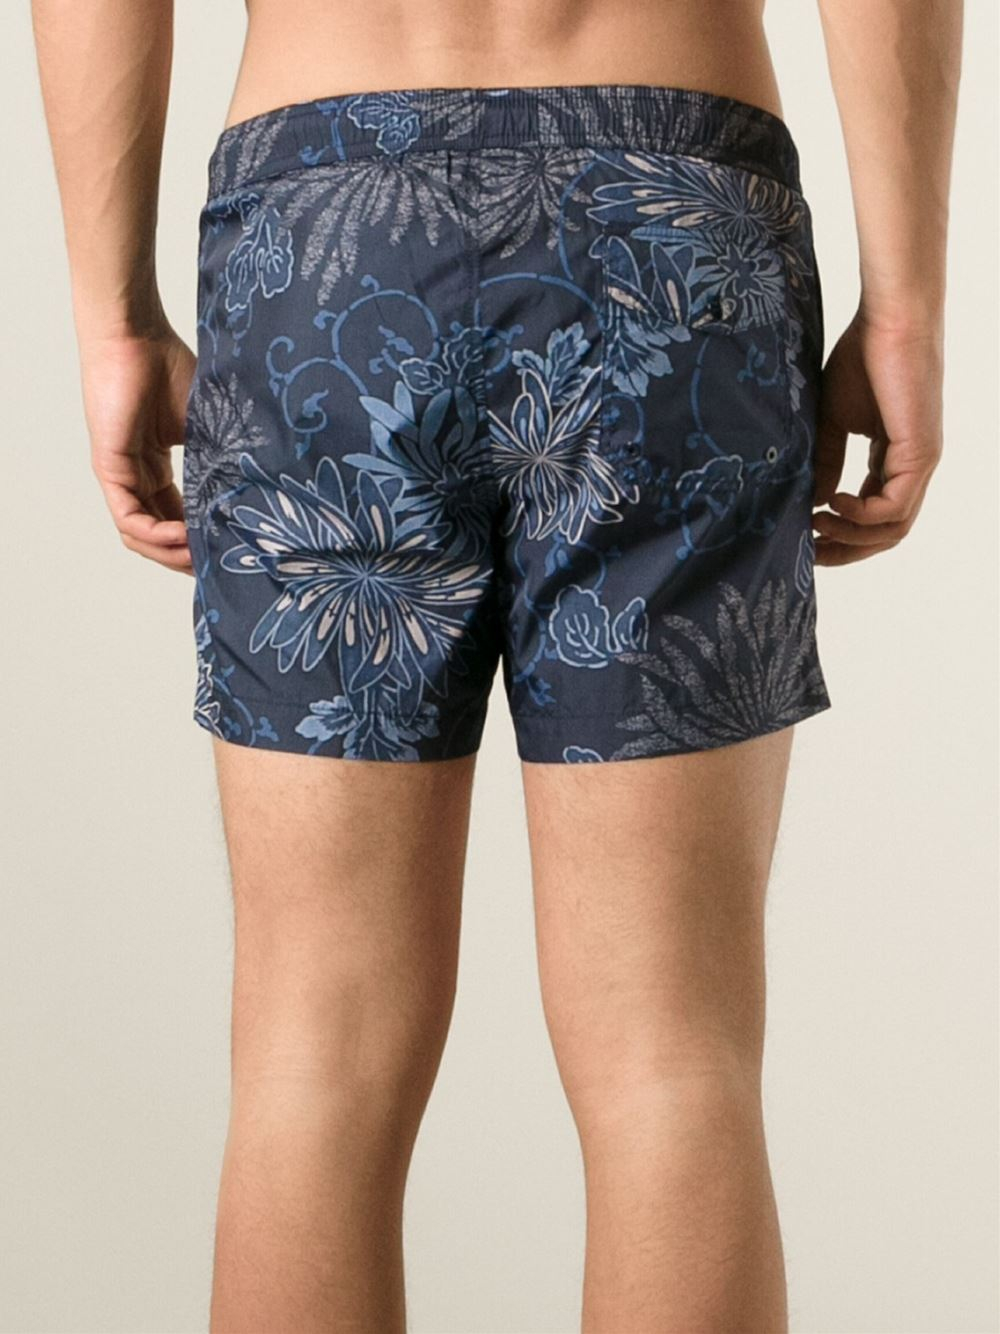 Moncler Floral Print Swimming Shorts in Blue for Men - Lyst